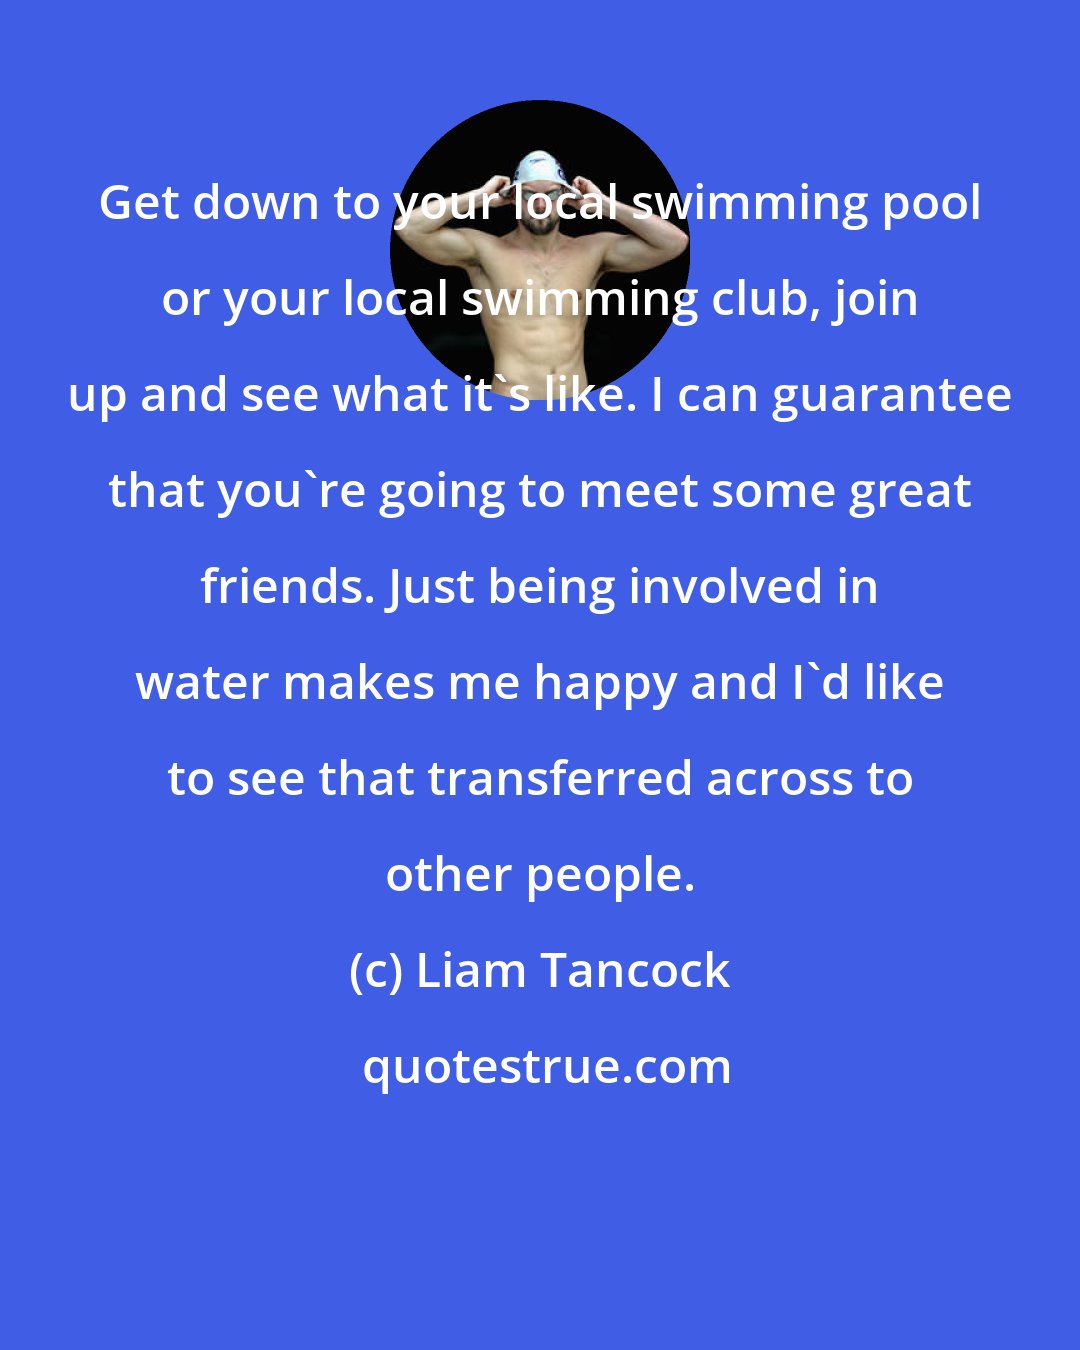 Liam Tancock: Get down to your local swimming pool or your local swimming club, join up and see what it's like. I can guarantee that you're going to meet some great friends. Just being involved in water makes me happy and I'd like to see that transferred across to other people.